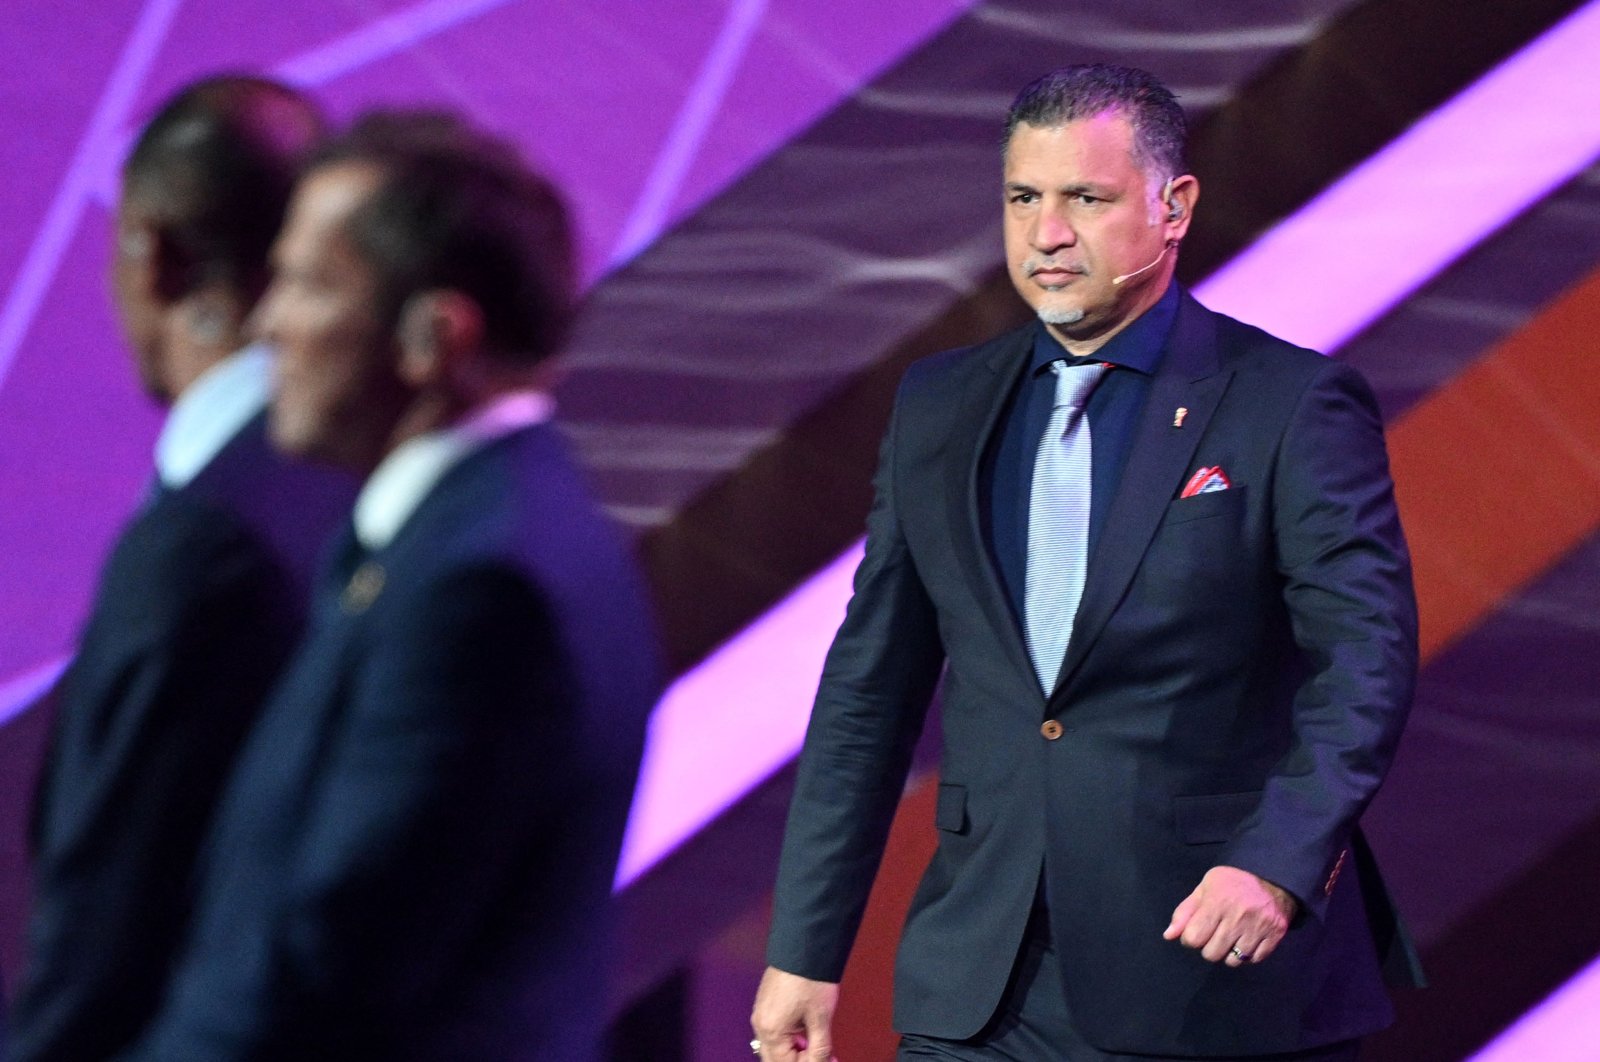 Former Iranian footballer Ali Daei arrives on stage during the draw for the 2022 World Cup at the Doha Exhibition and Convention Center, Doha, Qatar, April 1, 2022. (AFP Photo)